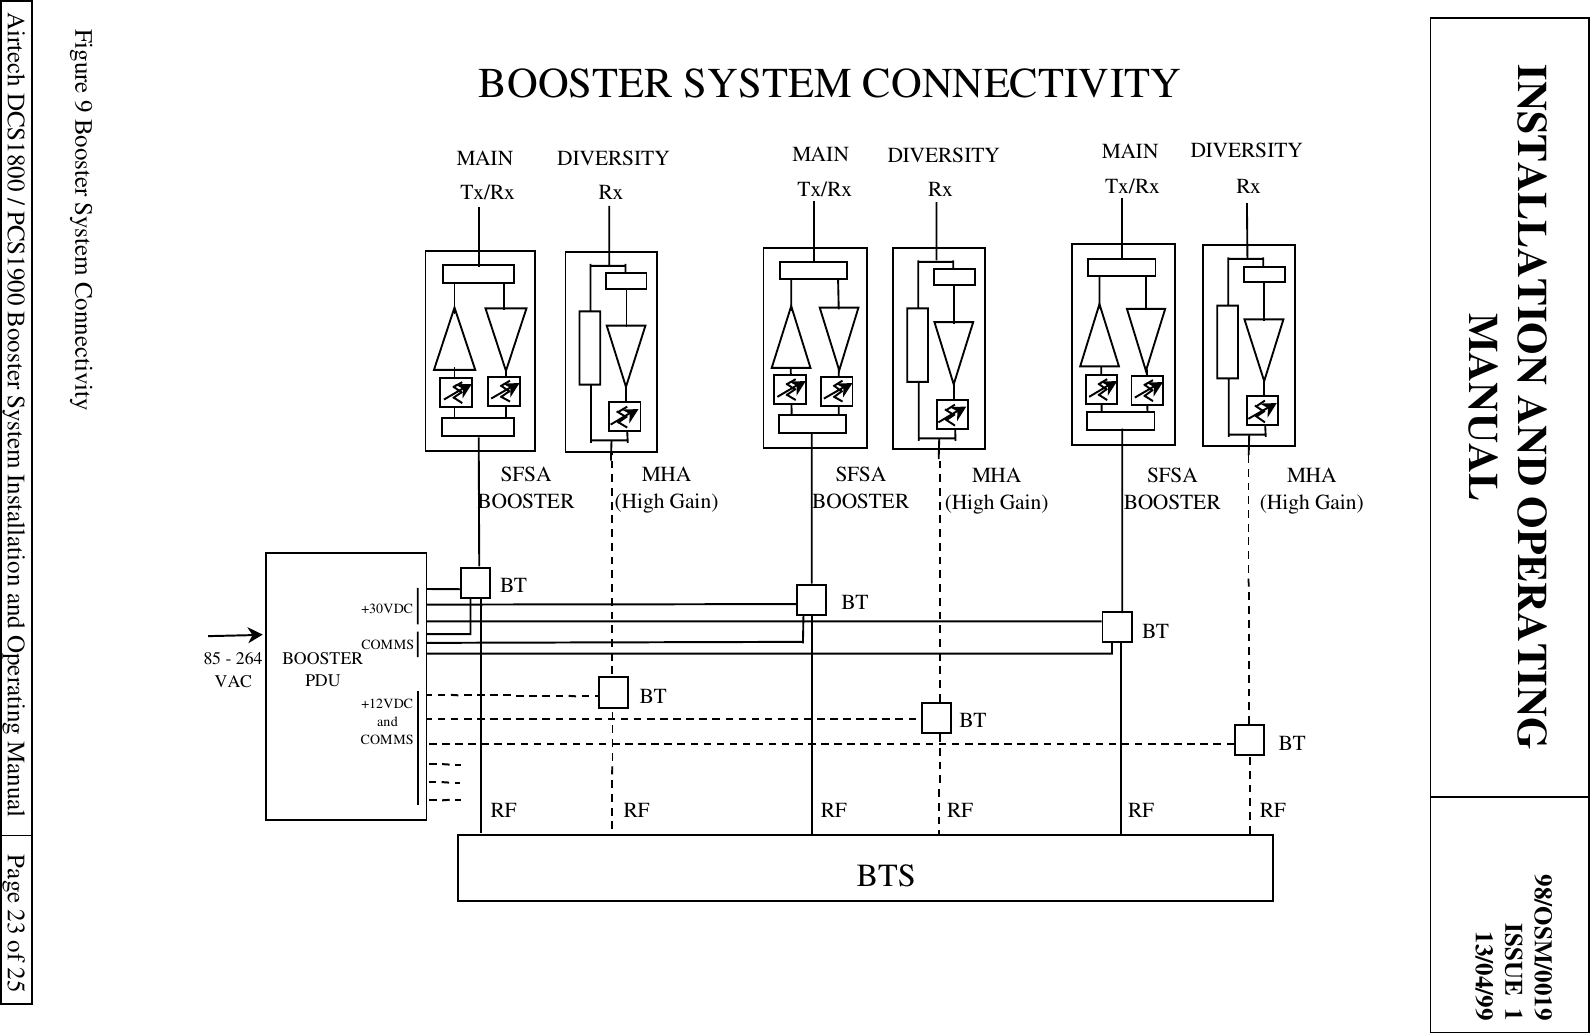 INSTALLATION AND OPERATINGMANUAL98/OSM/0019ISSUE  113/04/99Airtech DCS1800 / PCS1900 Booster System Installation and Operating Manual Page 23 of 25Figure 9 Booster System Connectivity85 - 264VACTx/Rx RxSFSABOOSTERTx/Rx RxBTBTBTBTRF RF RF RFTx/Rx RxBTBTRF RFSFSABOOSTERMHA(High Gain)SFSABOOSTERBOOSTERPDUMHA(High Gain)BTSMAIN DIVERSITY MAIN DIVERSITY MAIN DIVERSITY+30VDCCOMMS+12VDCandCOMMSMHA(High Gain)BOOSTER SYSTEM CONNECTIVITY